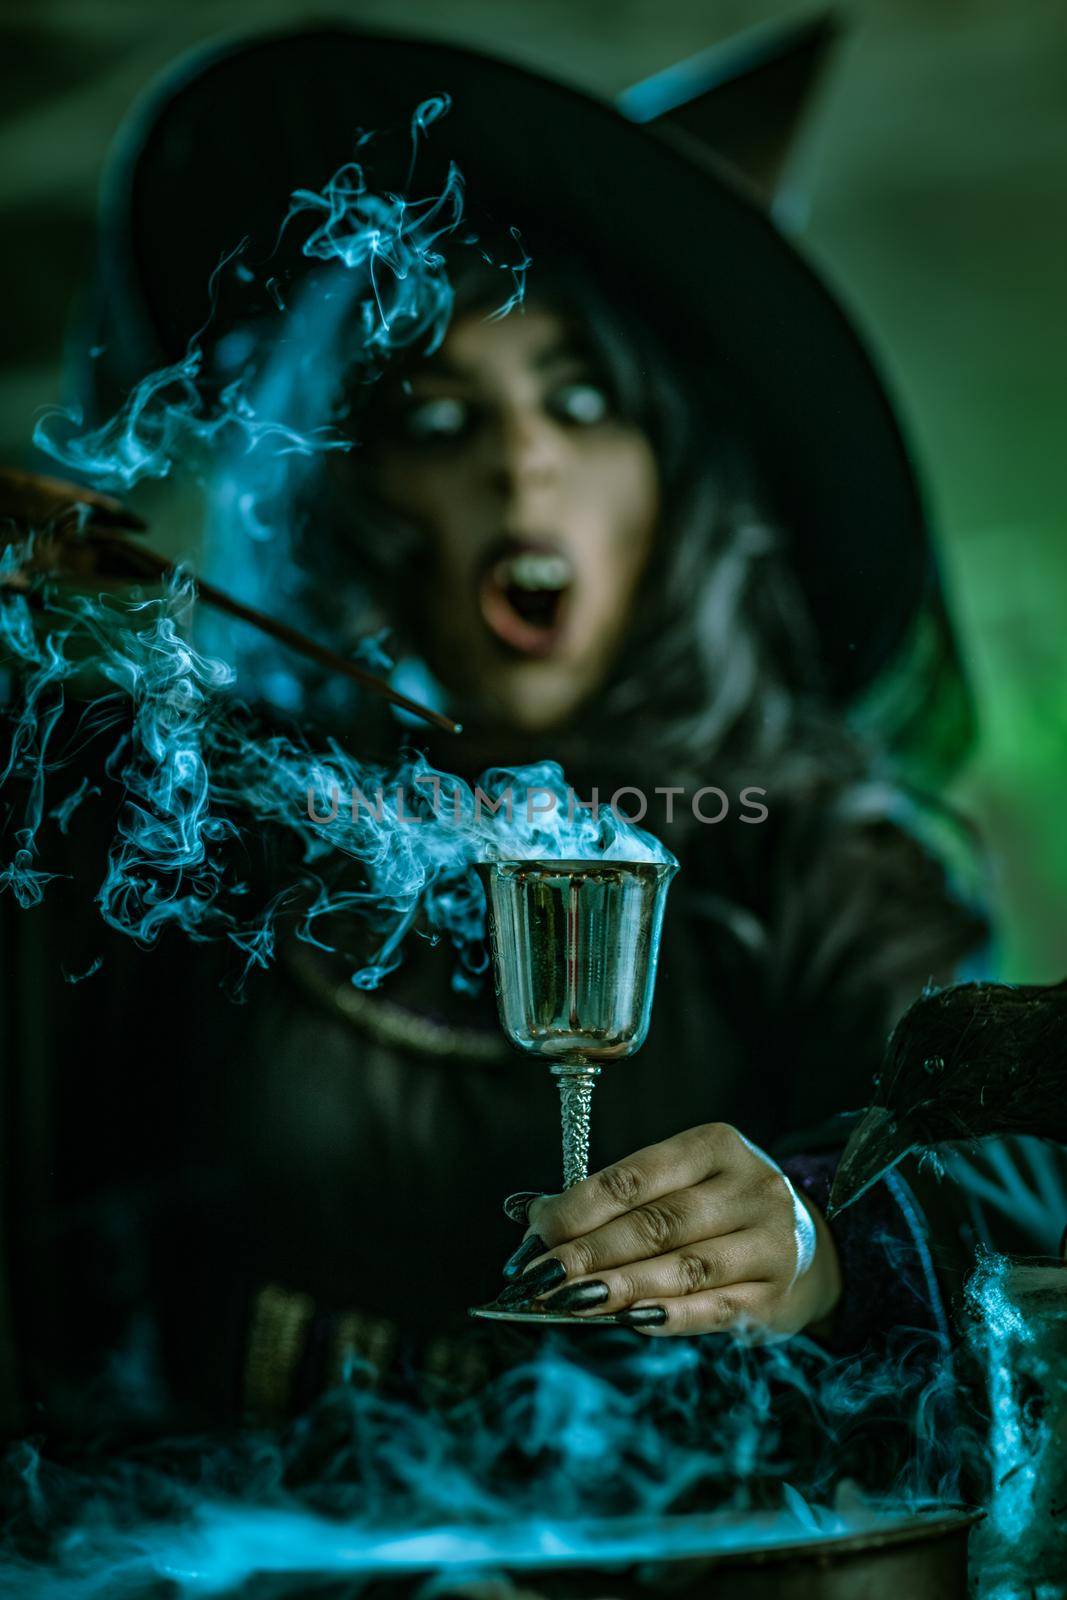 Portrait of witch with awfully face in creepy surroundings and smoky green background drinks magic potion from the goblet.